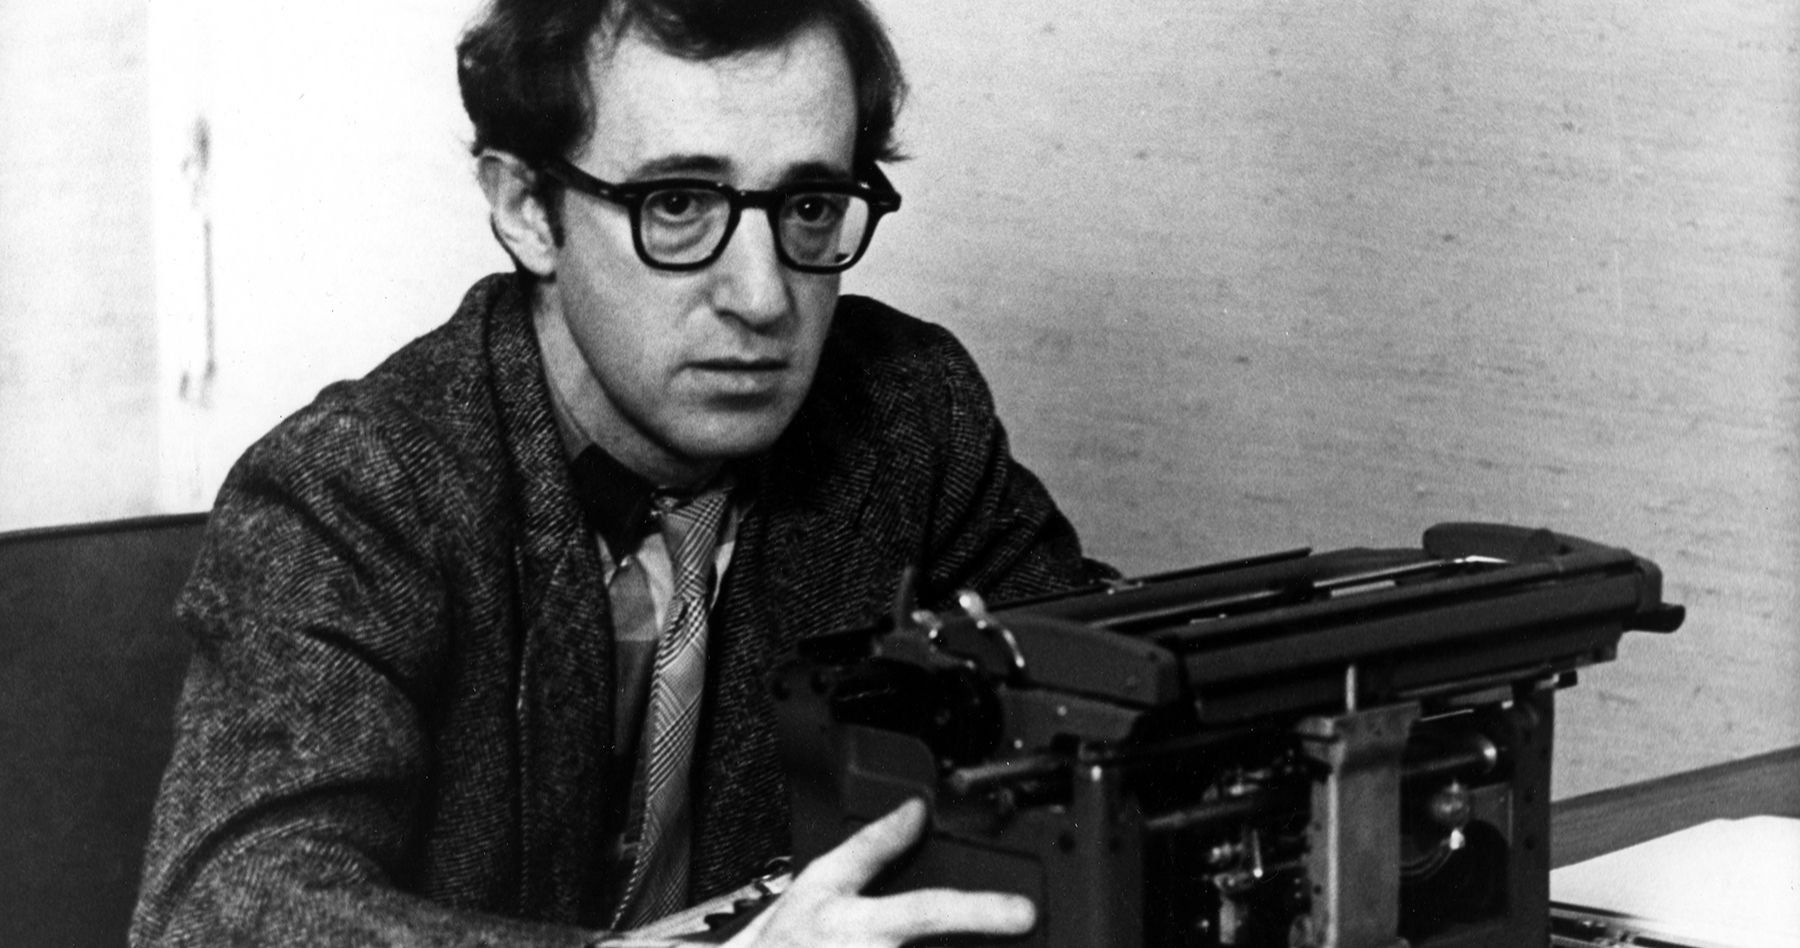 Woody Allen's Memoir Gets the Axe at Hachette Publishing After Employees Walkout